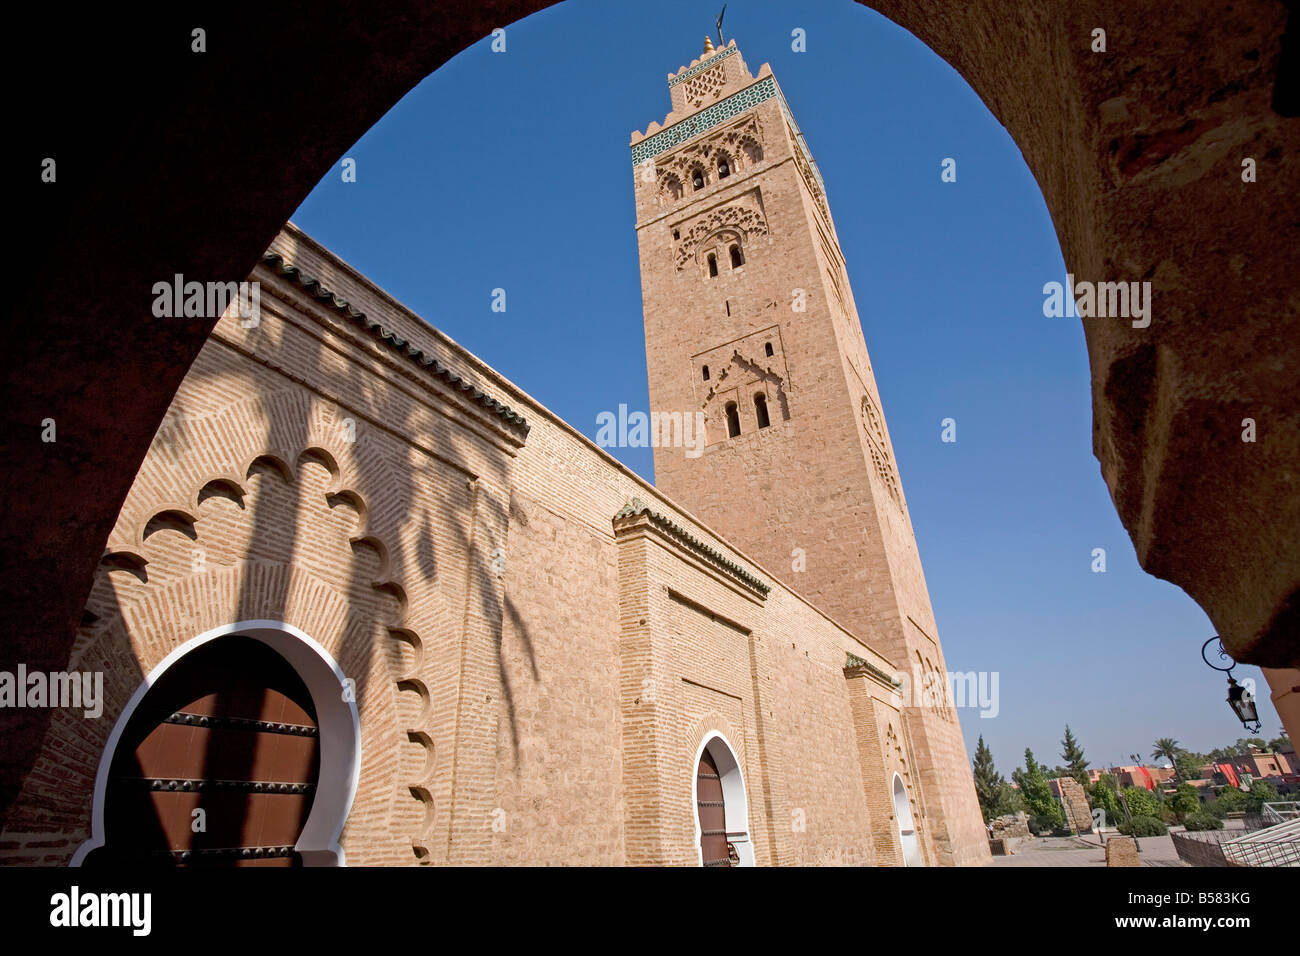 Koutoubia tower (minaret), Marrakech, Morocco, North Africa, Africa Stock Photo